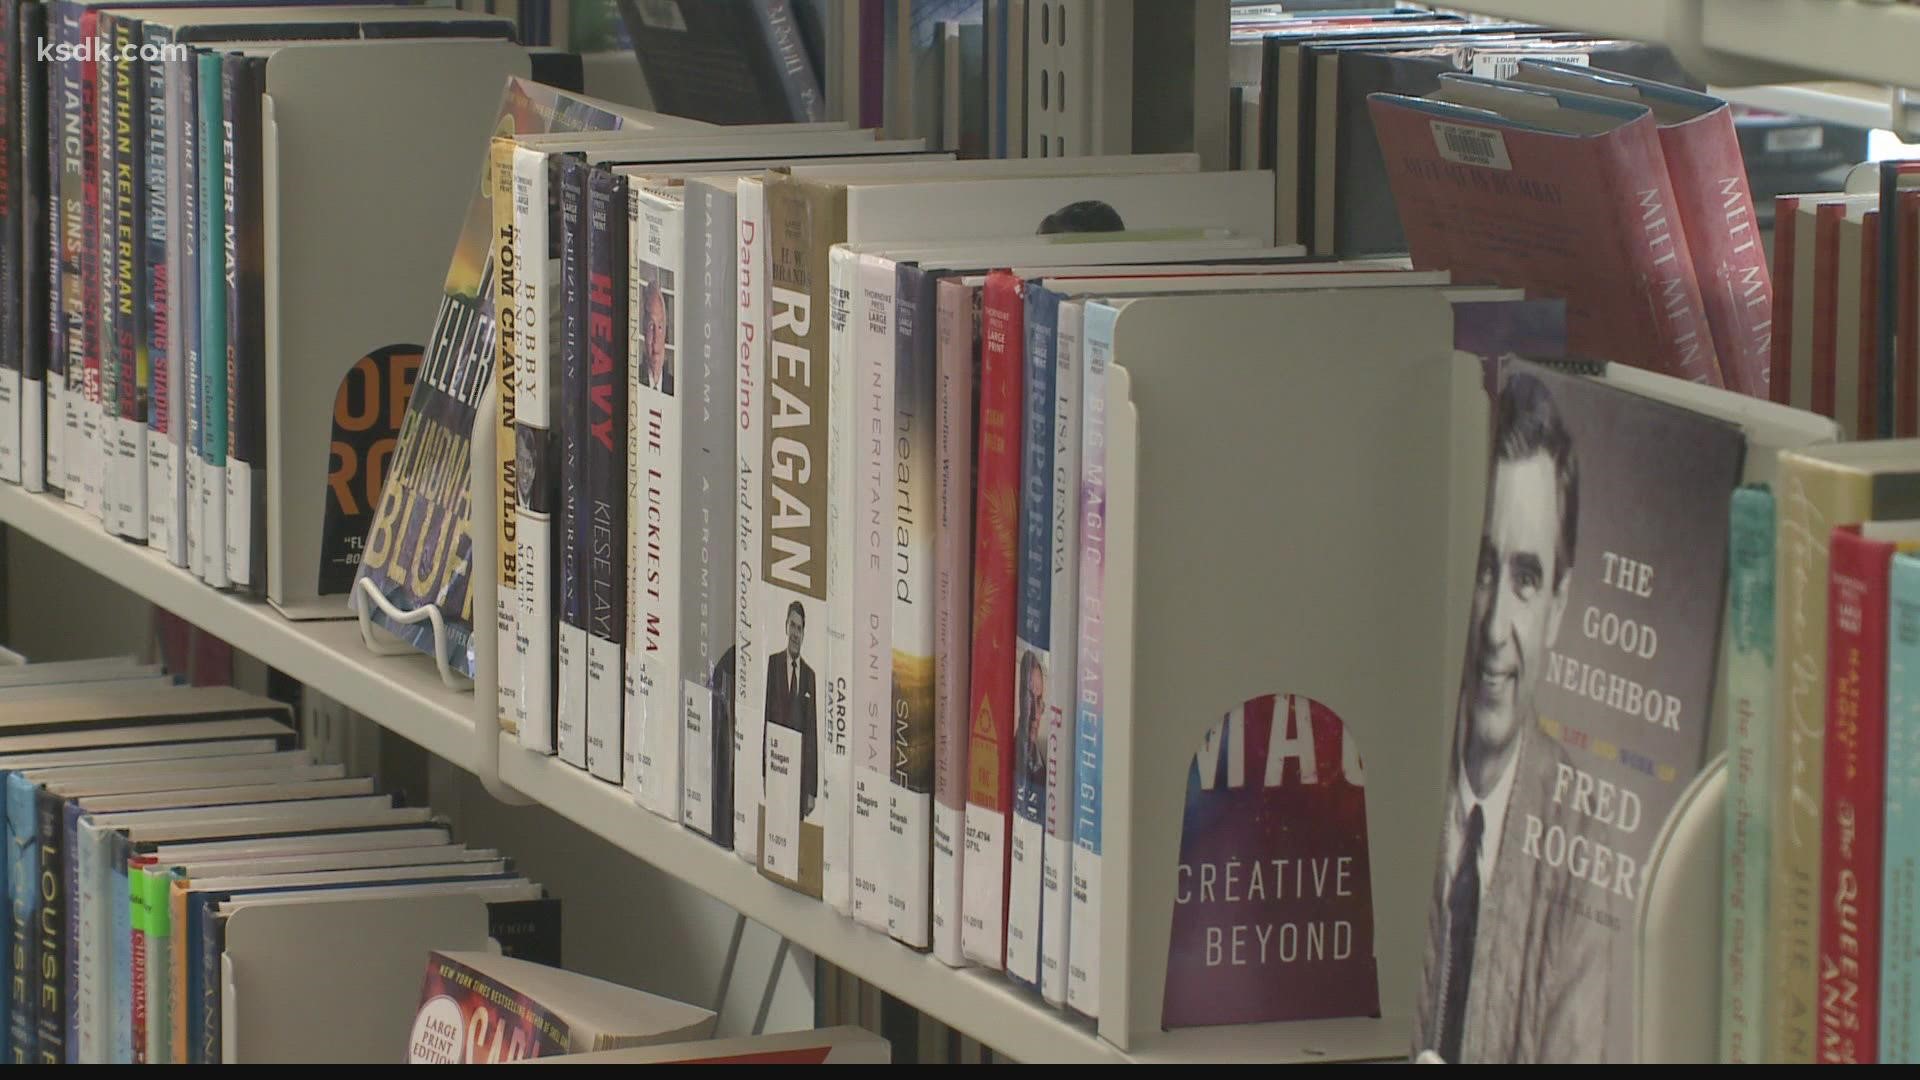 Readers will have access to more than five million items across the region.